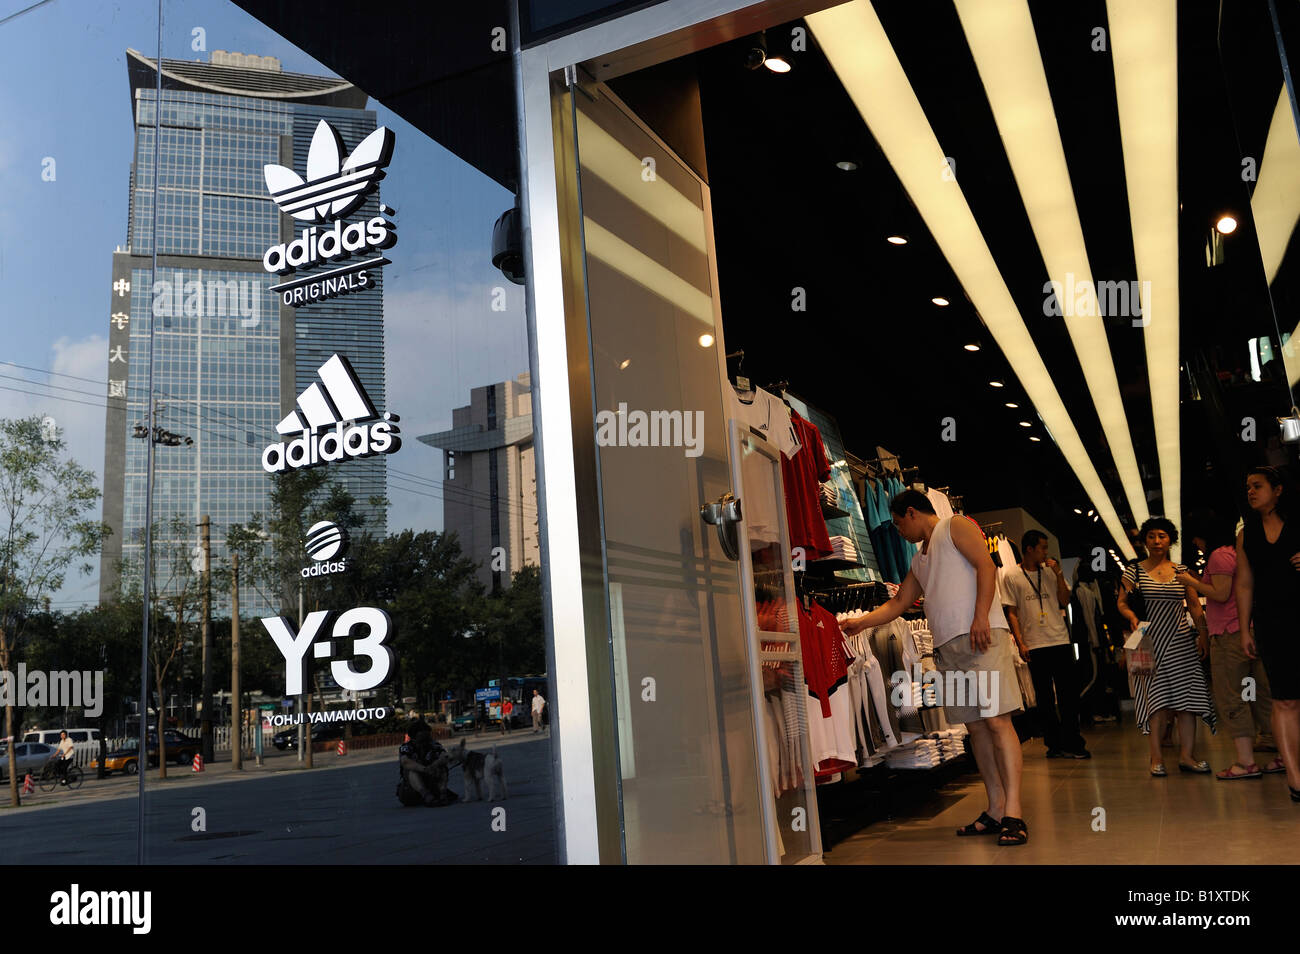 The largest Adidas outlet in the world 